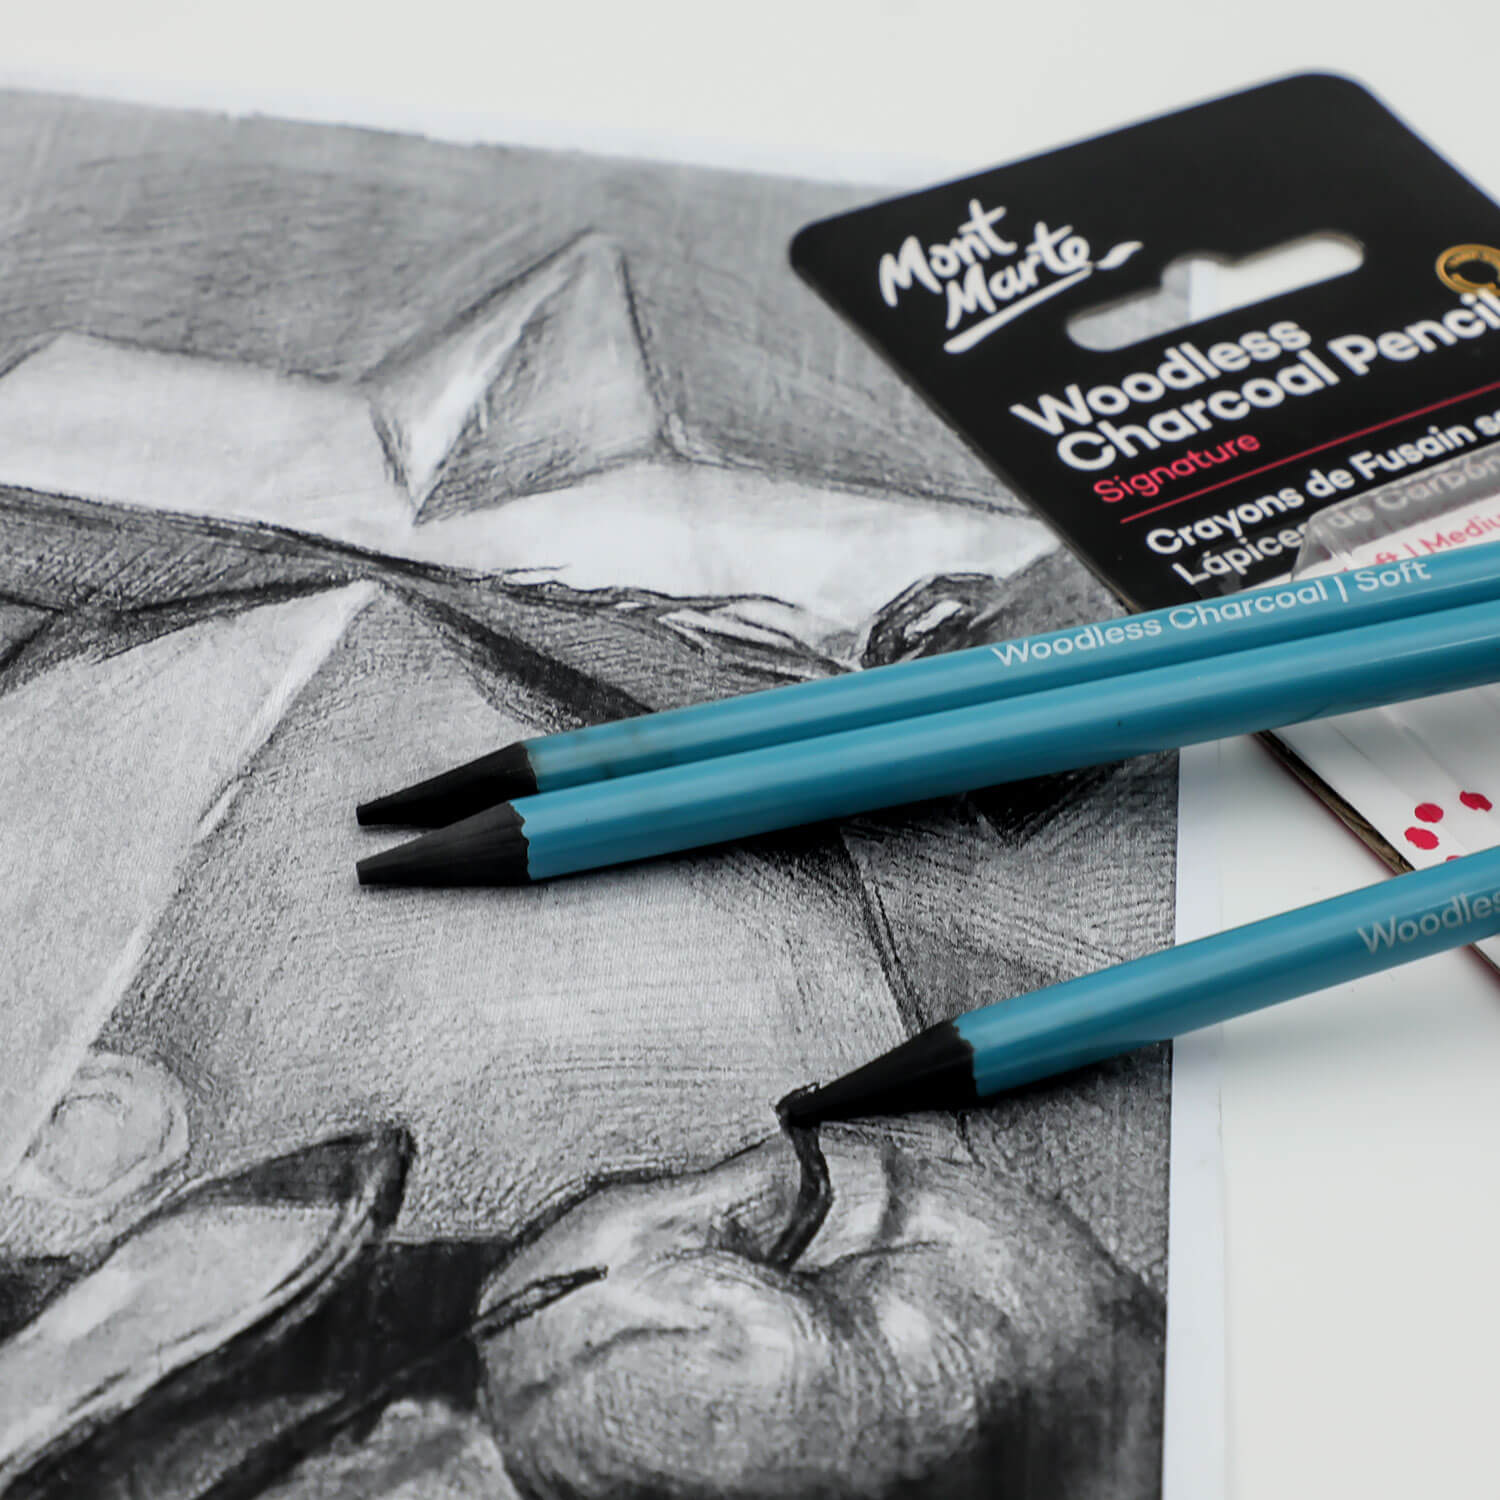 2. Woodless Charcoal Pencils with a blue laqueur coating